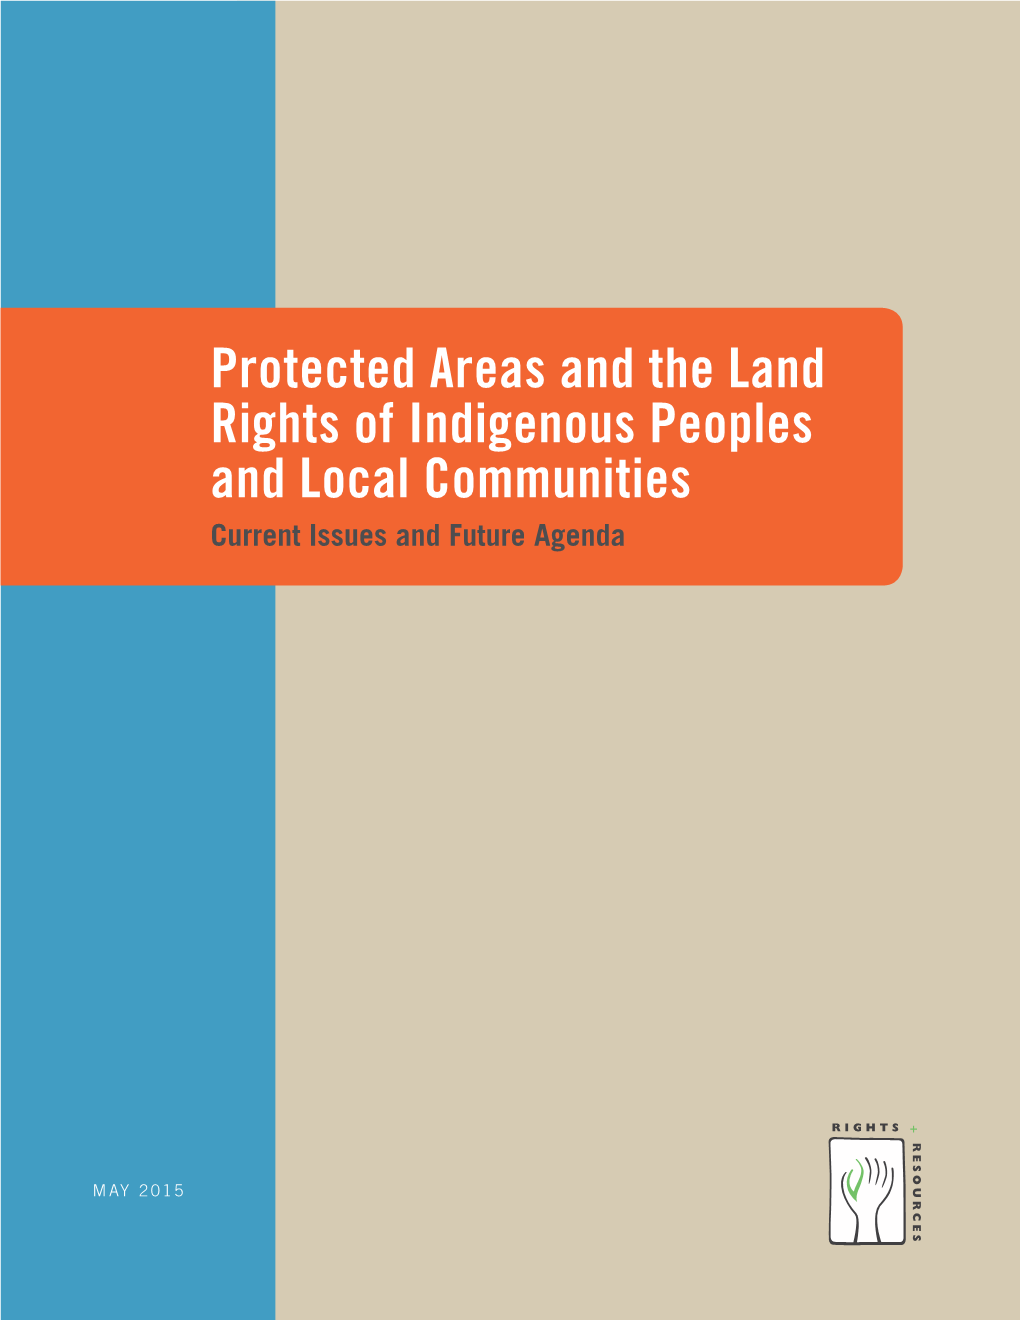 Protected Areas and the Land Rights of Indigenous Peoples and Local Communities Current Issues and Future Agenda